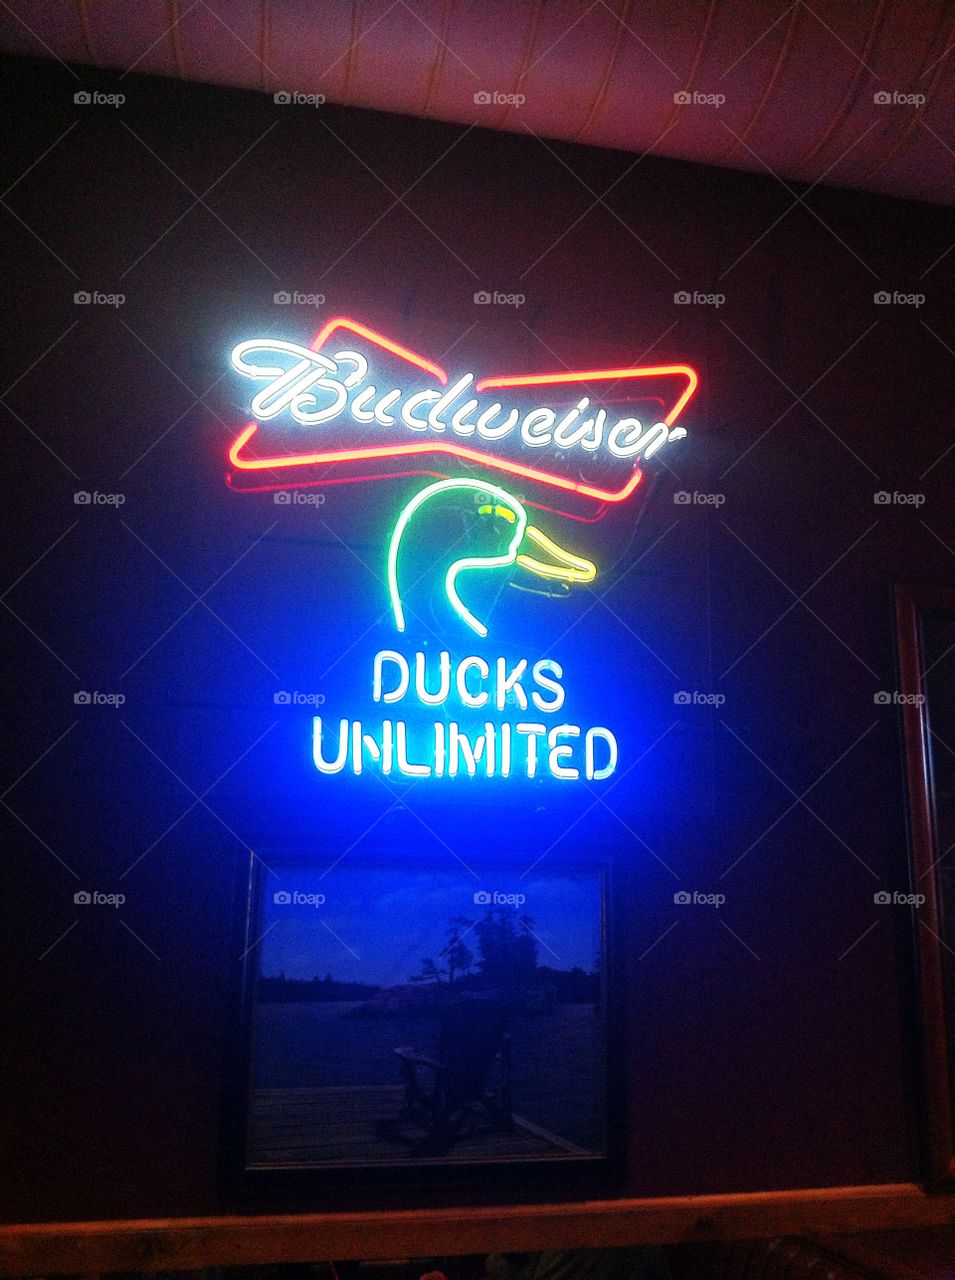 Beer and ducks. Mission Budweiser in bars